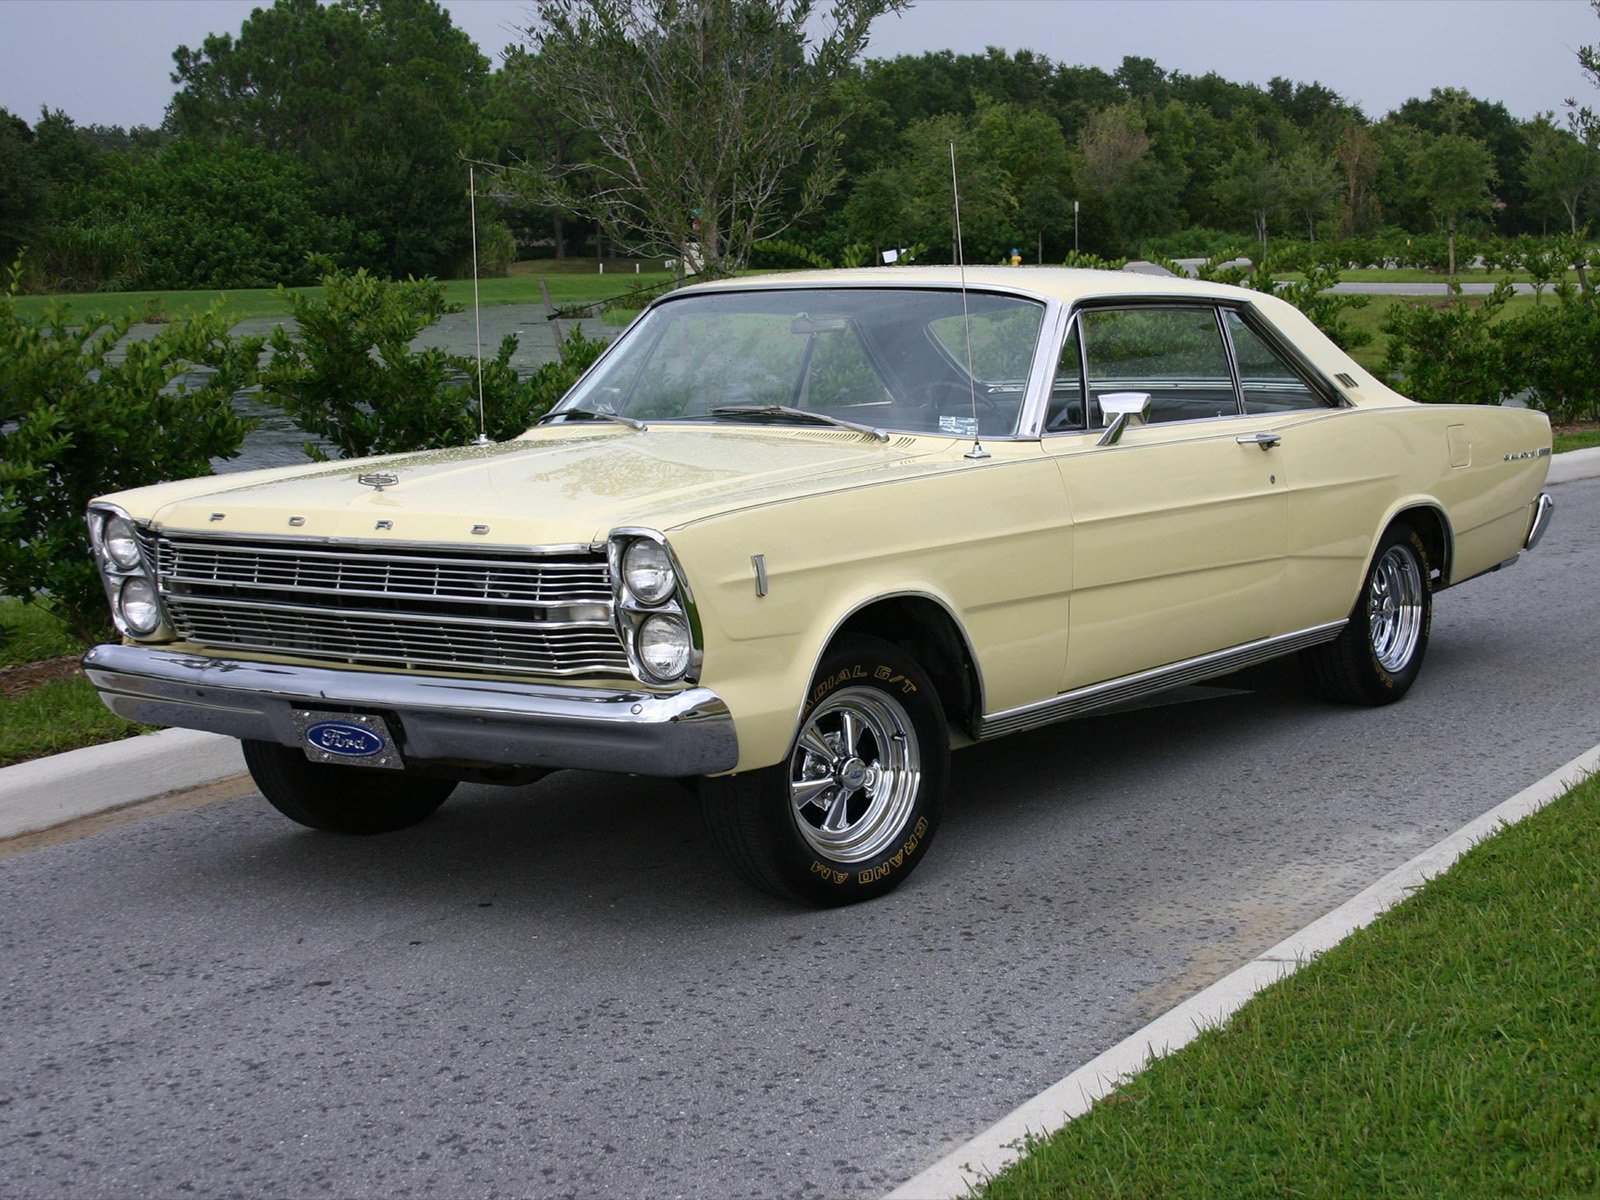 Ford Galaxie Hardtop Coupe Classic Wallpaper Background